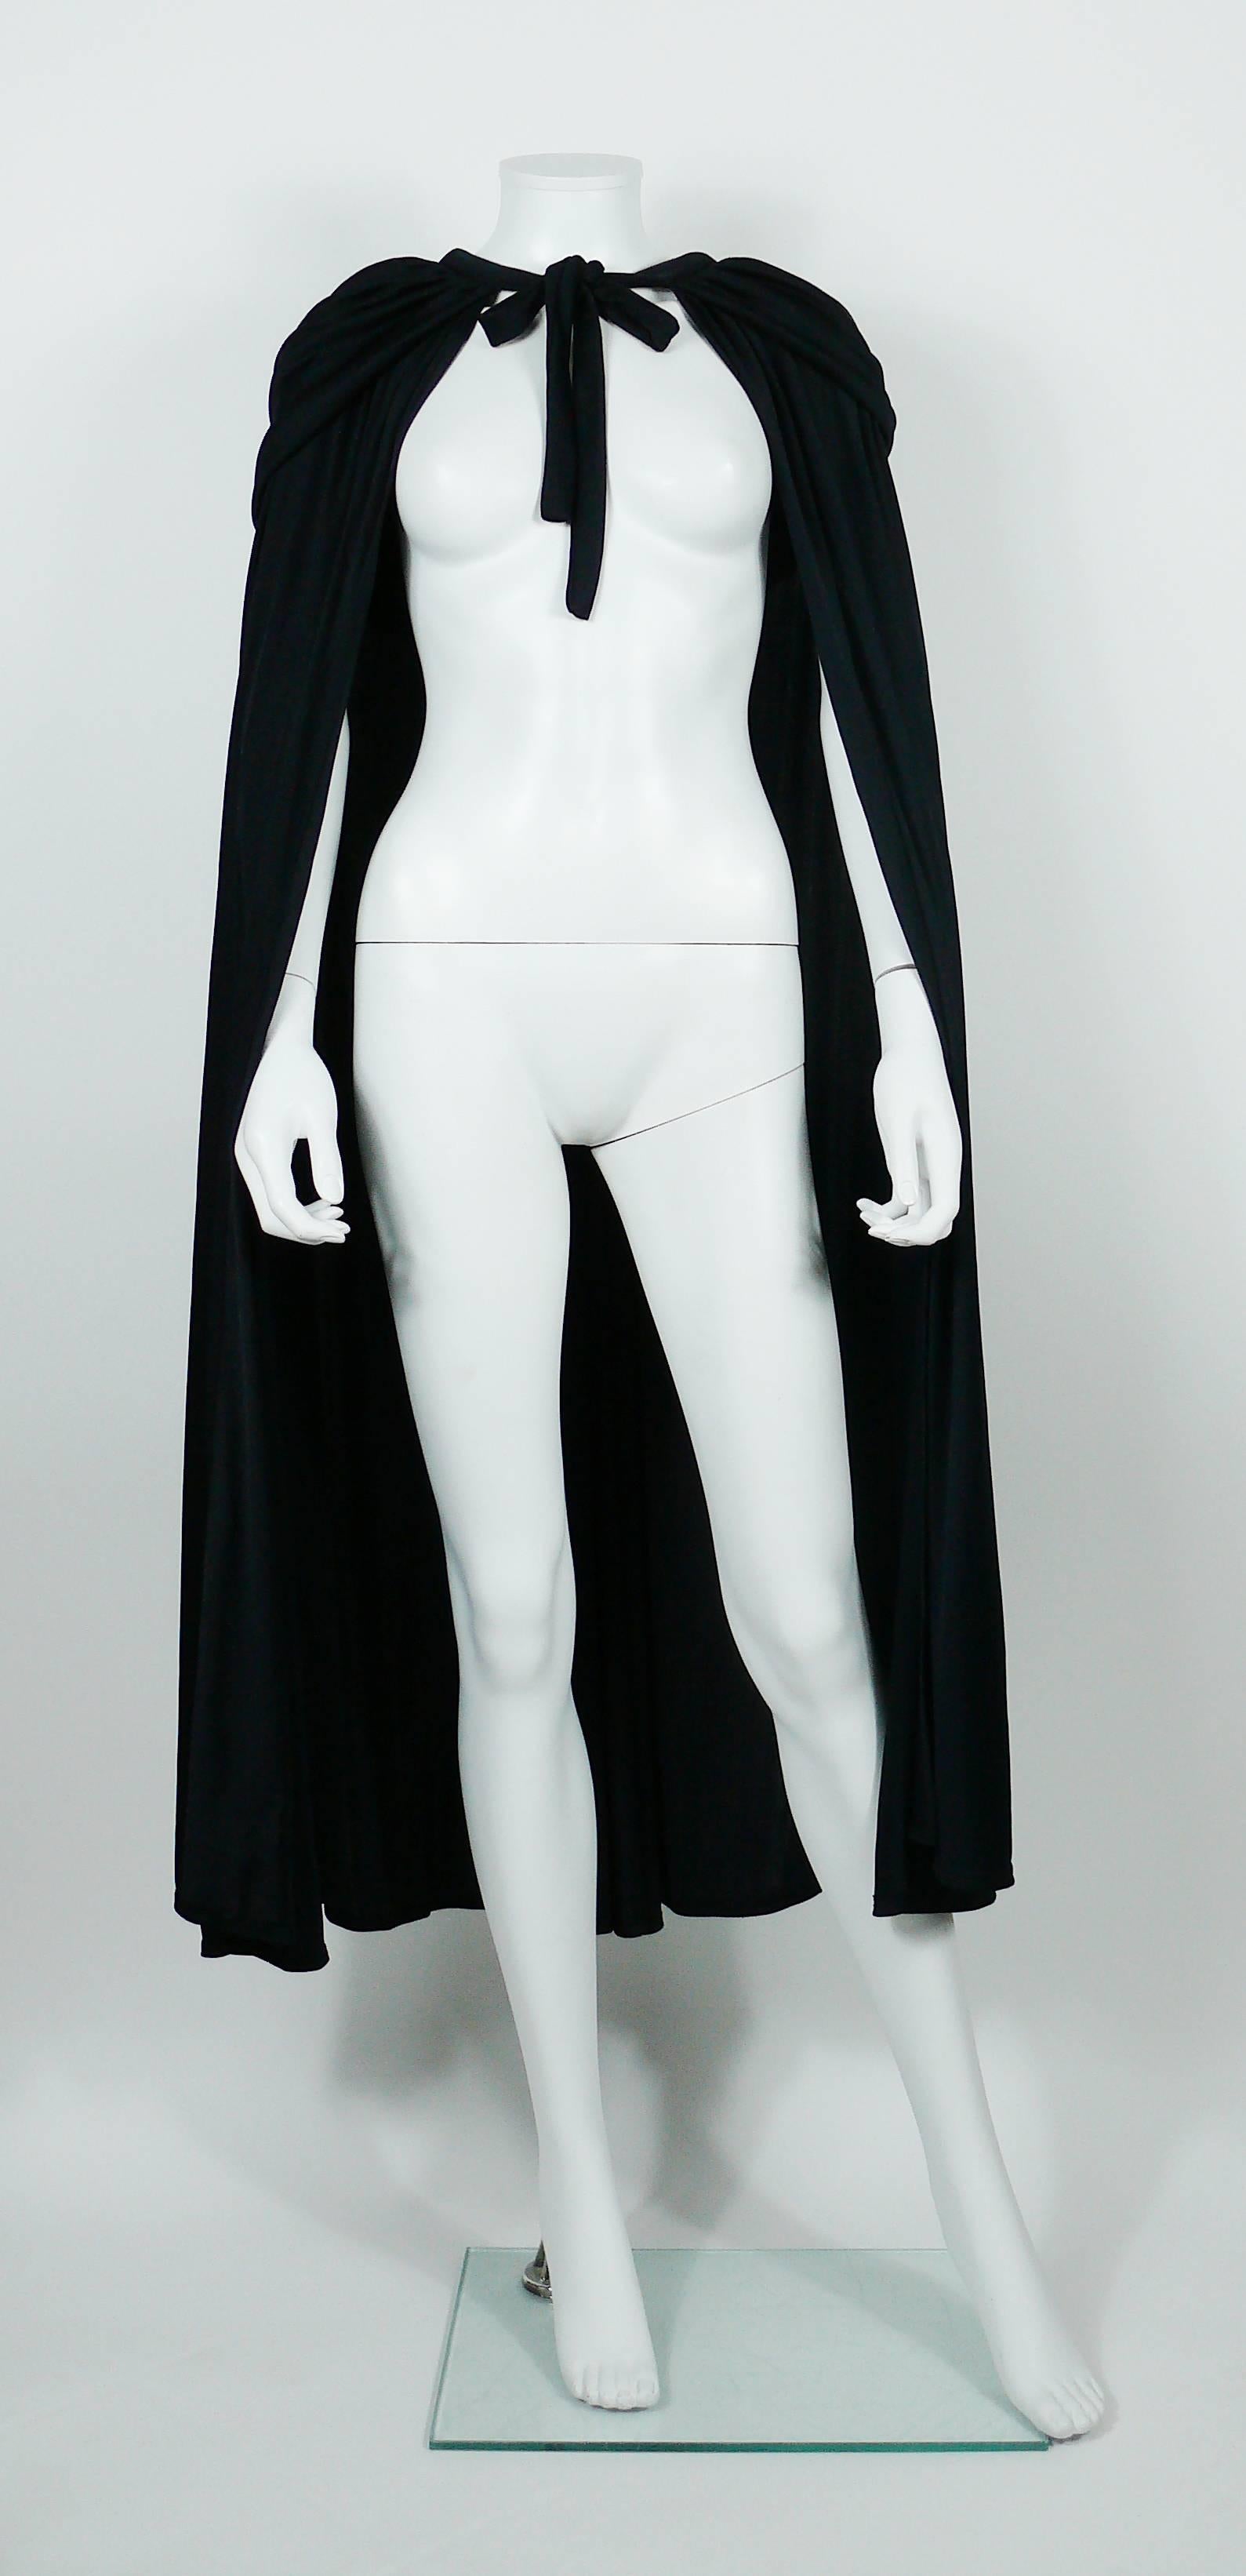 LORIS AZZARO vintage black jersey hooded cape with tie-neck.

Label reads LORIS AZZARO Paris.

Missing size and composition tags.
Please double check measurements. 

Indicative measurements taken laid flat : length approx. 120 cm (47.24